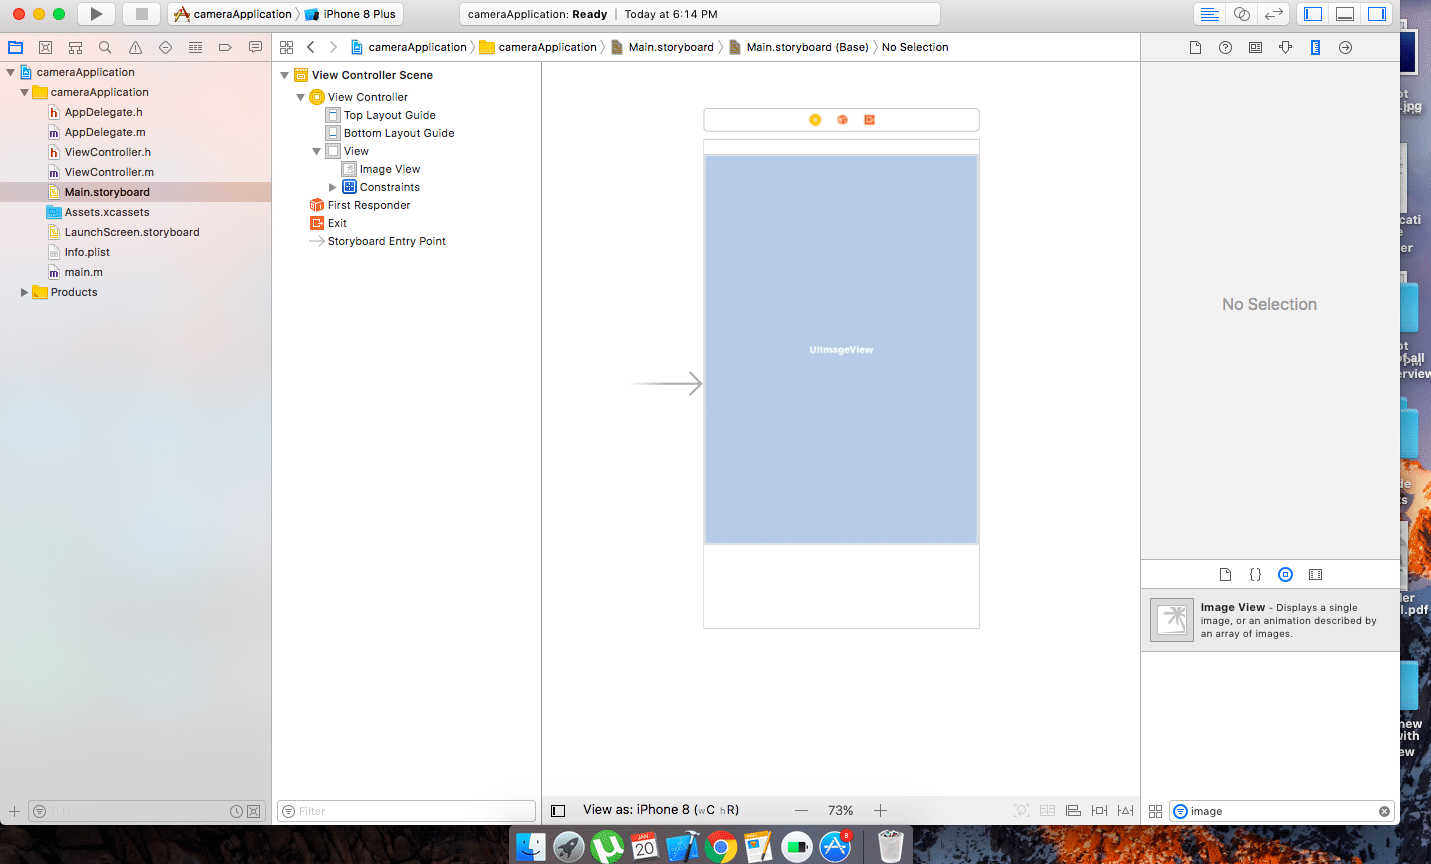 Select the UIImageView from the library on the right side